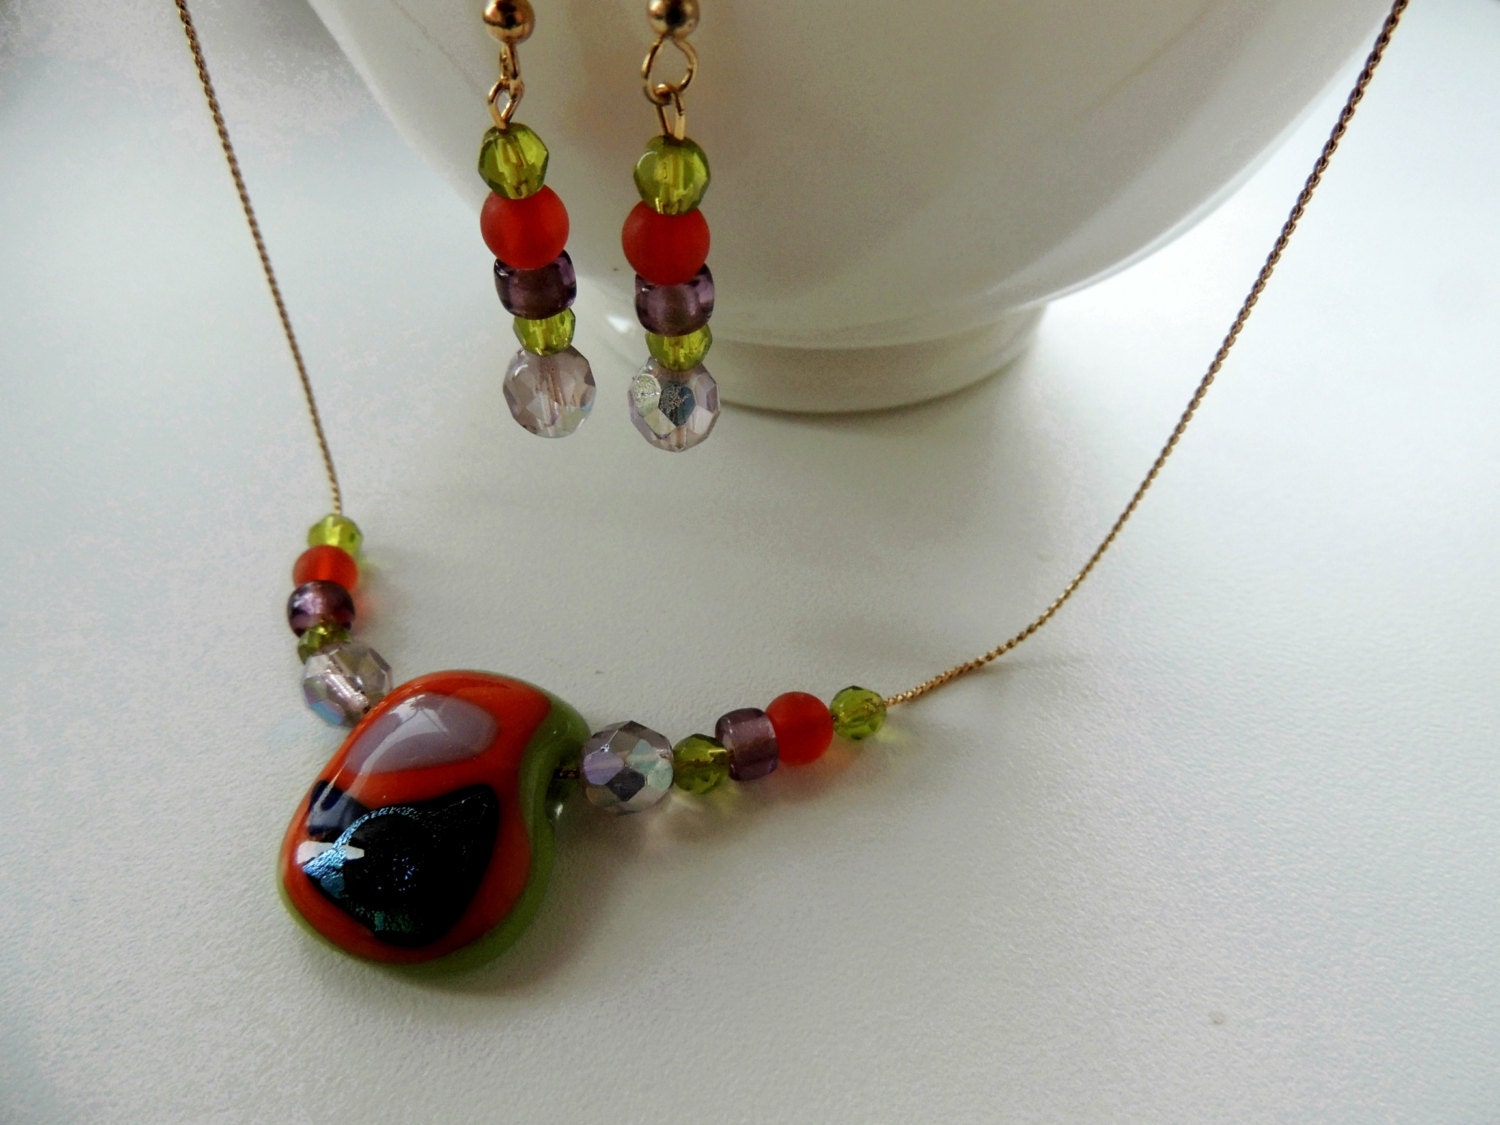 green orange fused glass necklace and earrings,jewelry set,glass necklace and earrings,glass beads earrings,gift for her,handmade jewelry - Homeforglasslovers